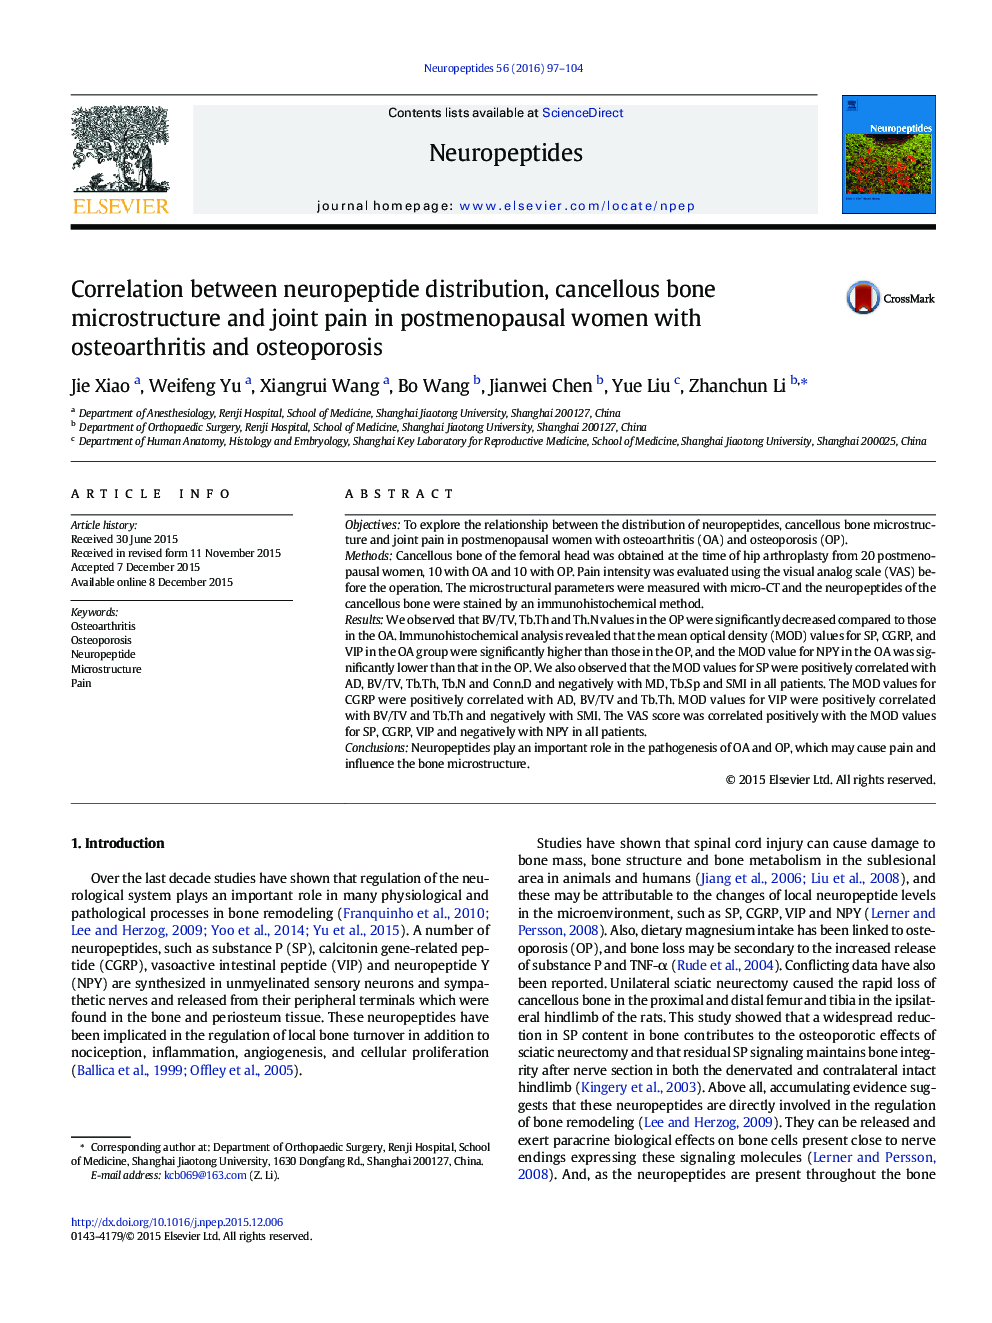 Correlation between neuropeptide distribution, cancellous bone microstructure and joint pain in postmenopausal women with osteoarthritis and osteoporosis